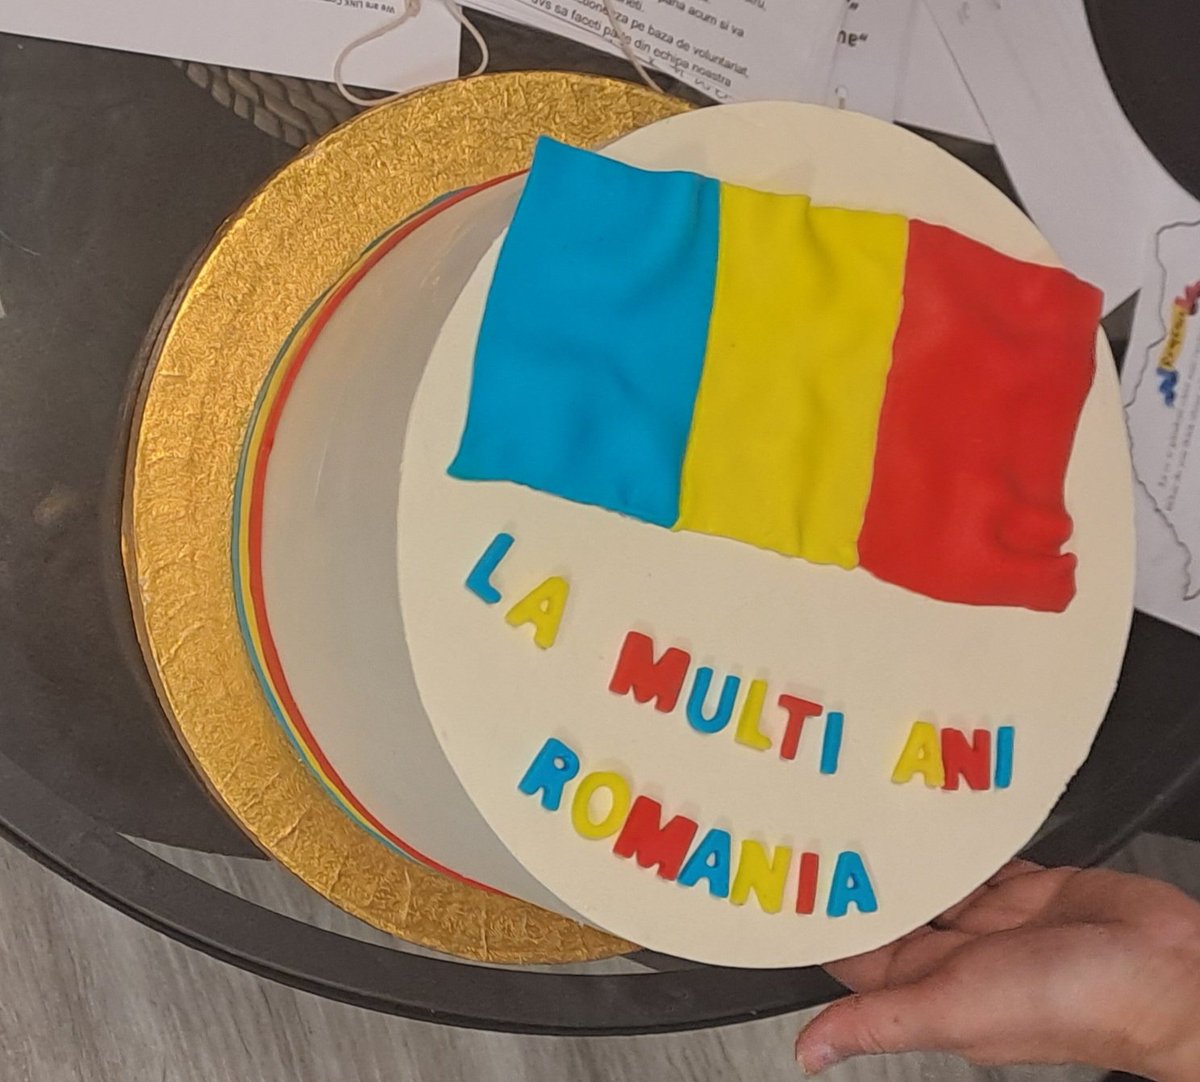 Thank you to Delia & all at the @LINKCENTRE_EEU for the invite to celebrate National Romania Day. The centre has done amazing work and the passion by the community is clear #community #cohesion